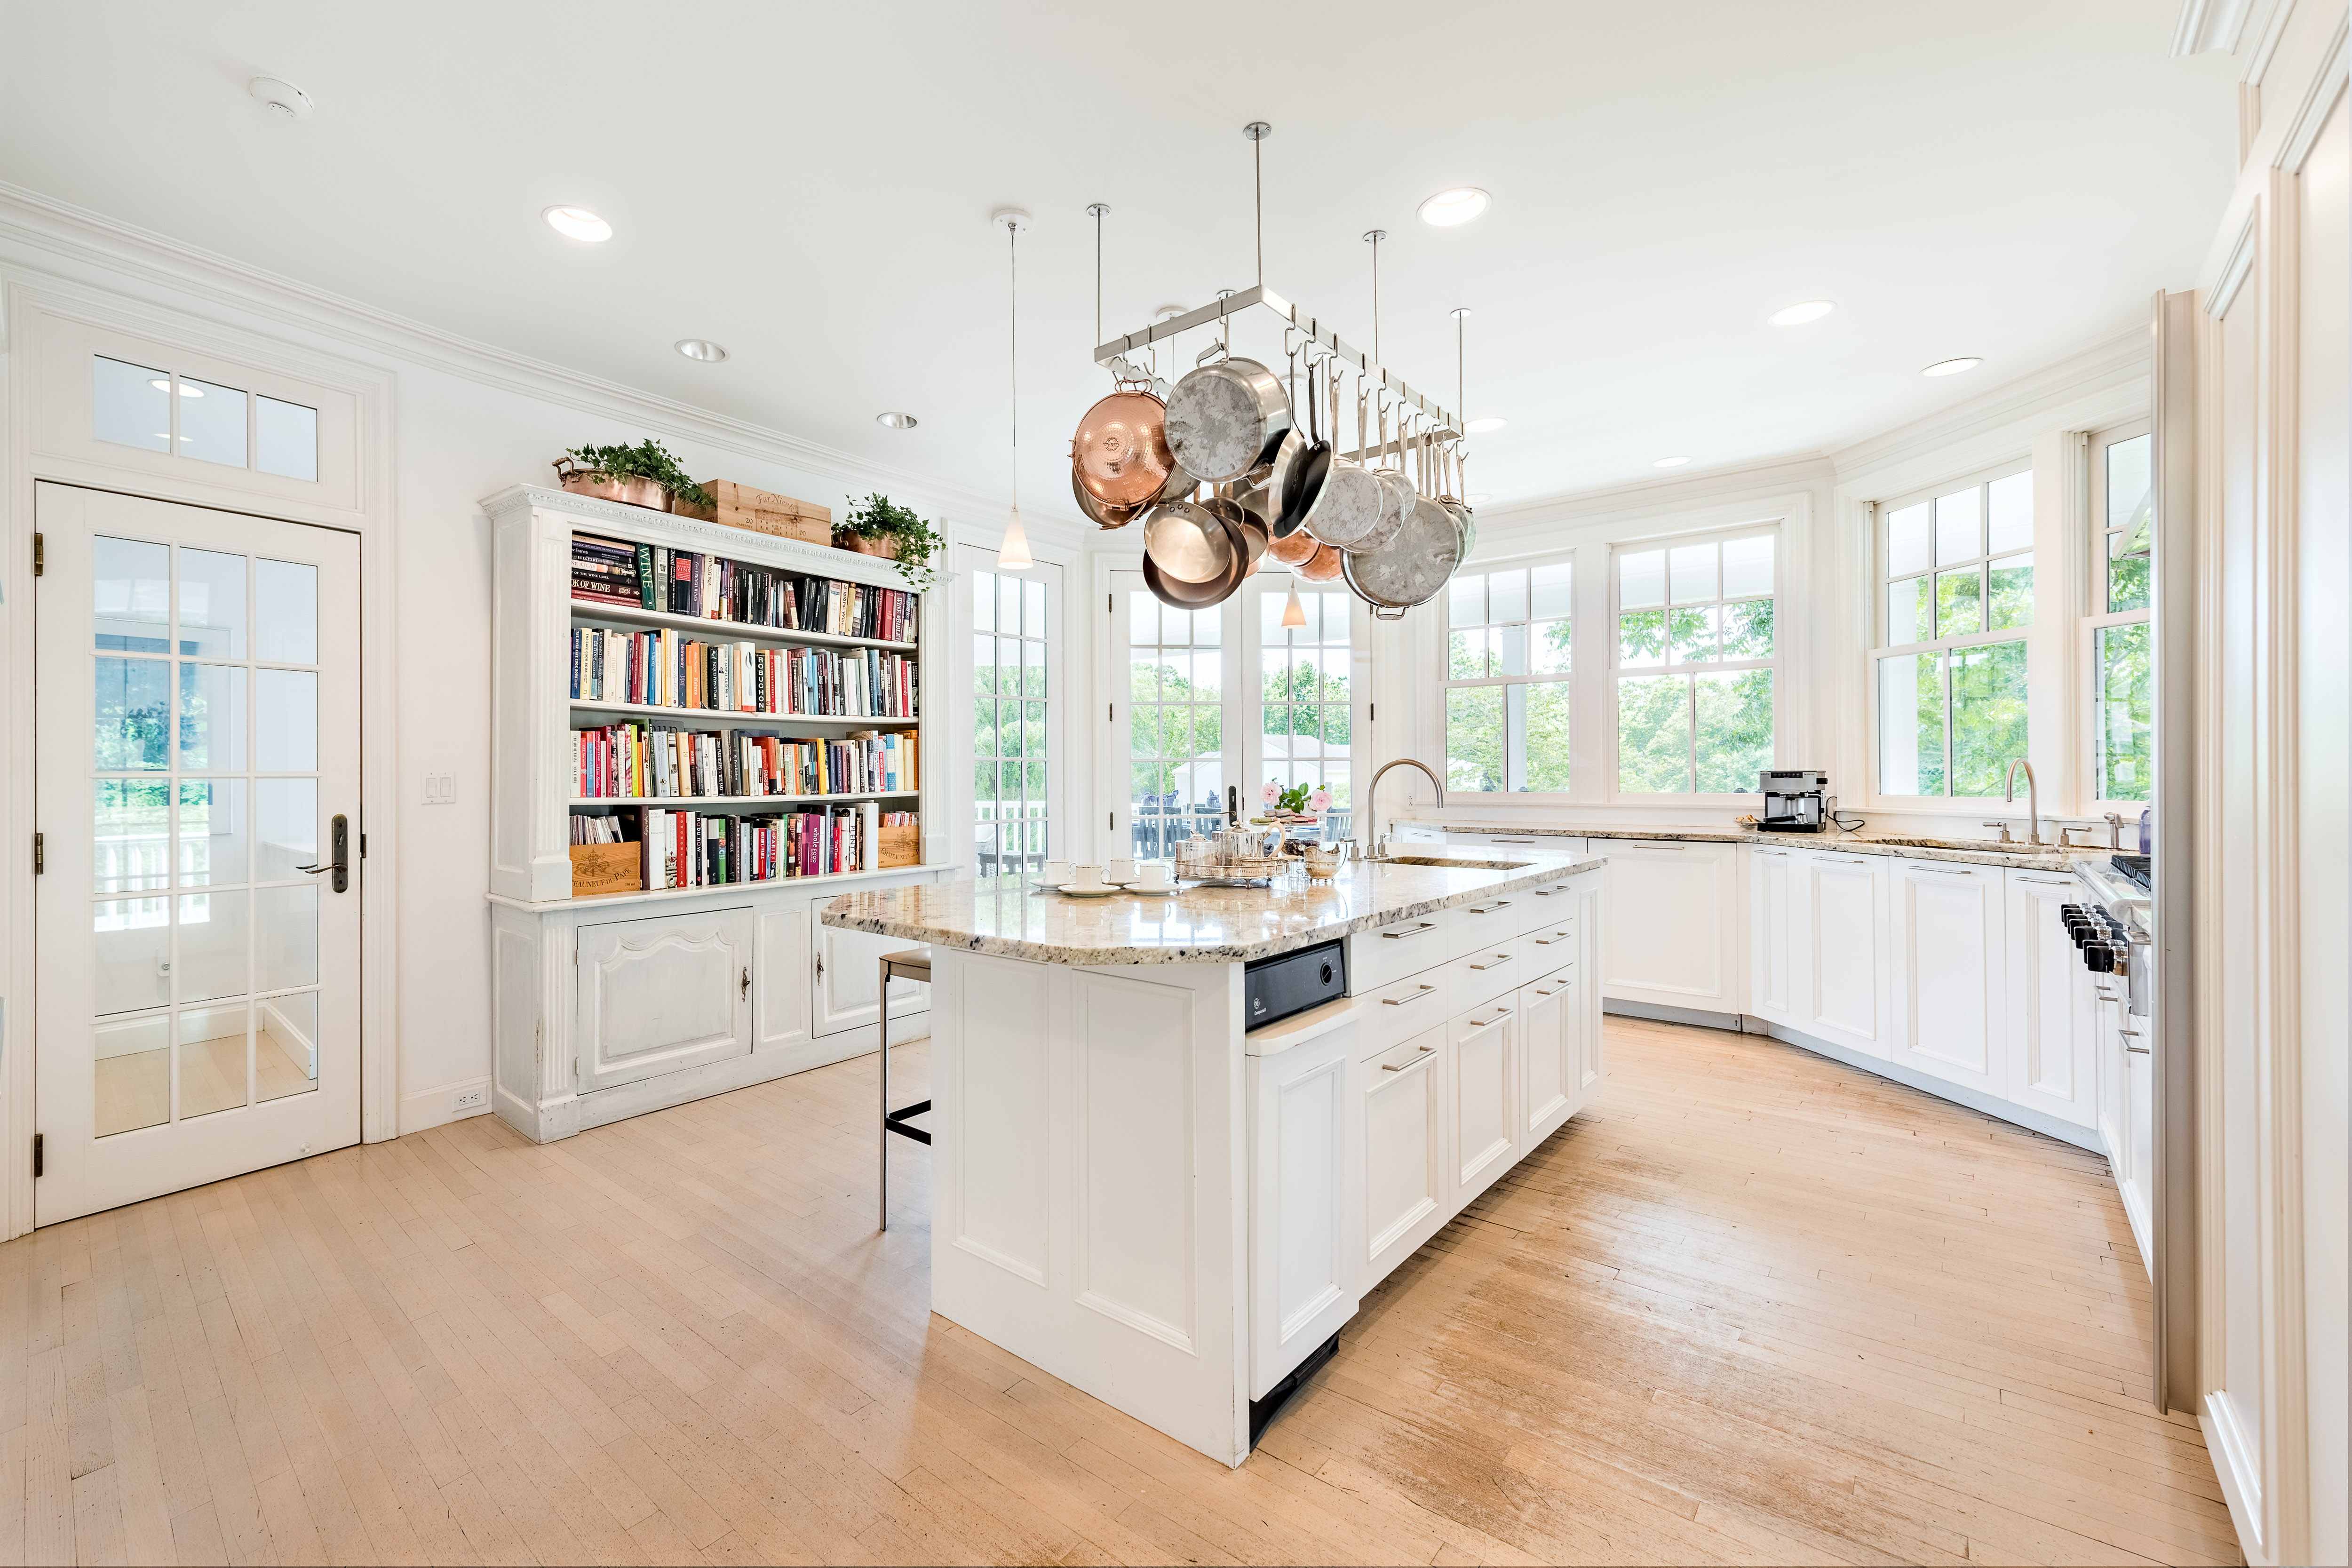 THE HOME features an open, modern kitchen. / COURTESY MOTT & CHACE SOTHEBY'S INTERNATIONAL REALTY